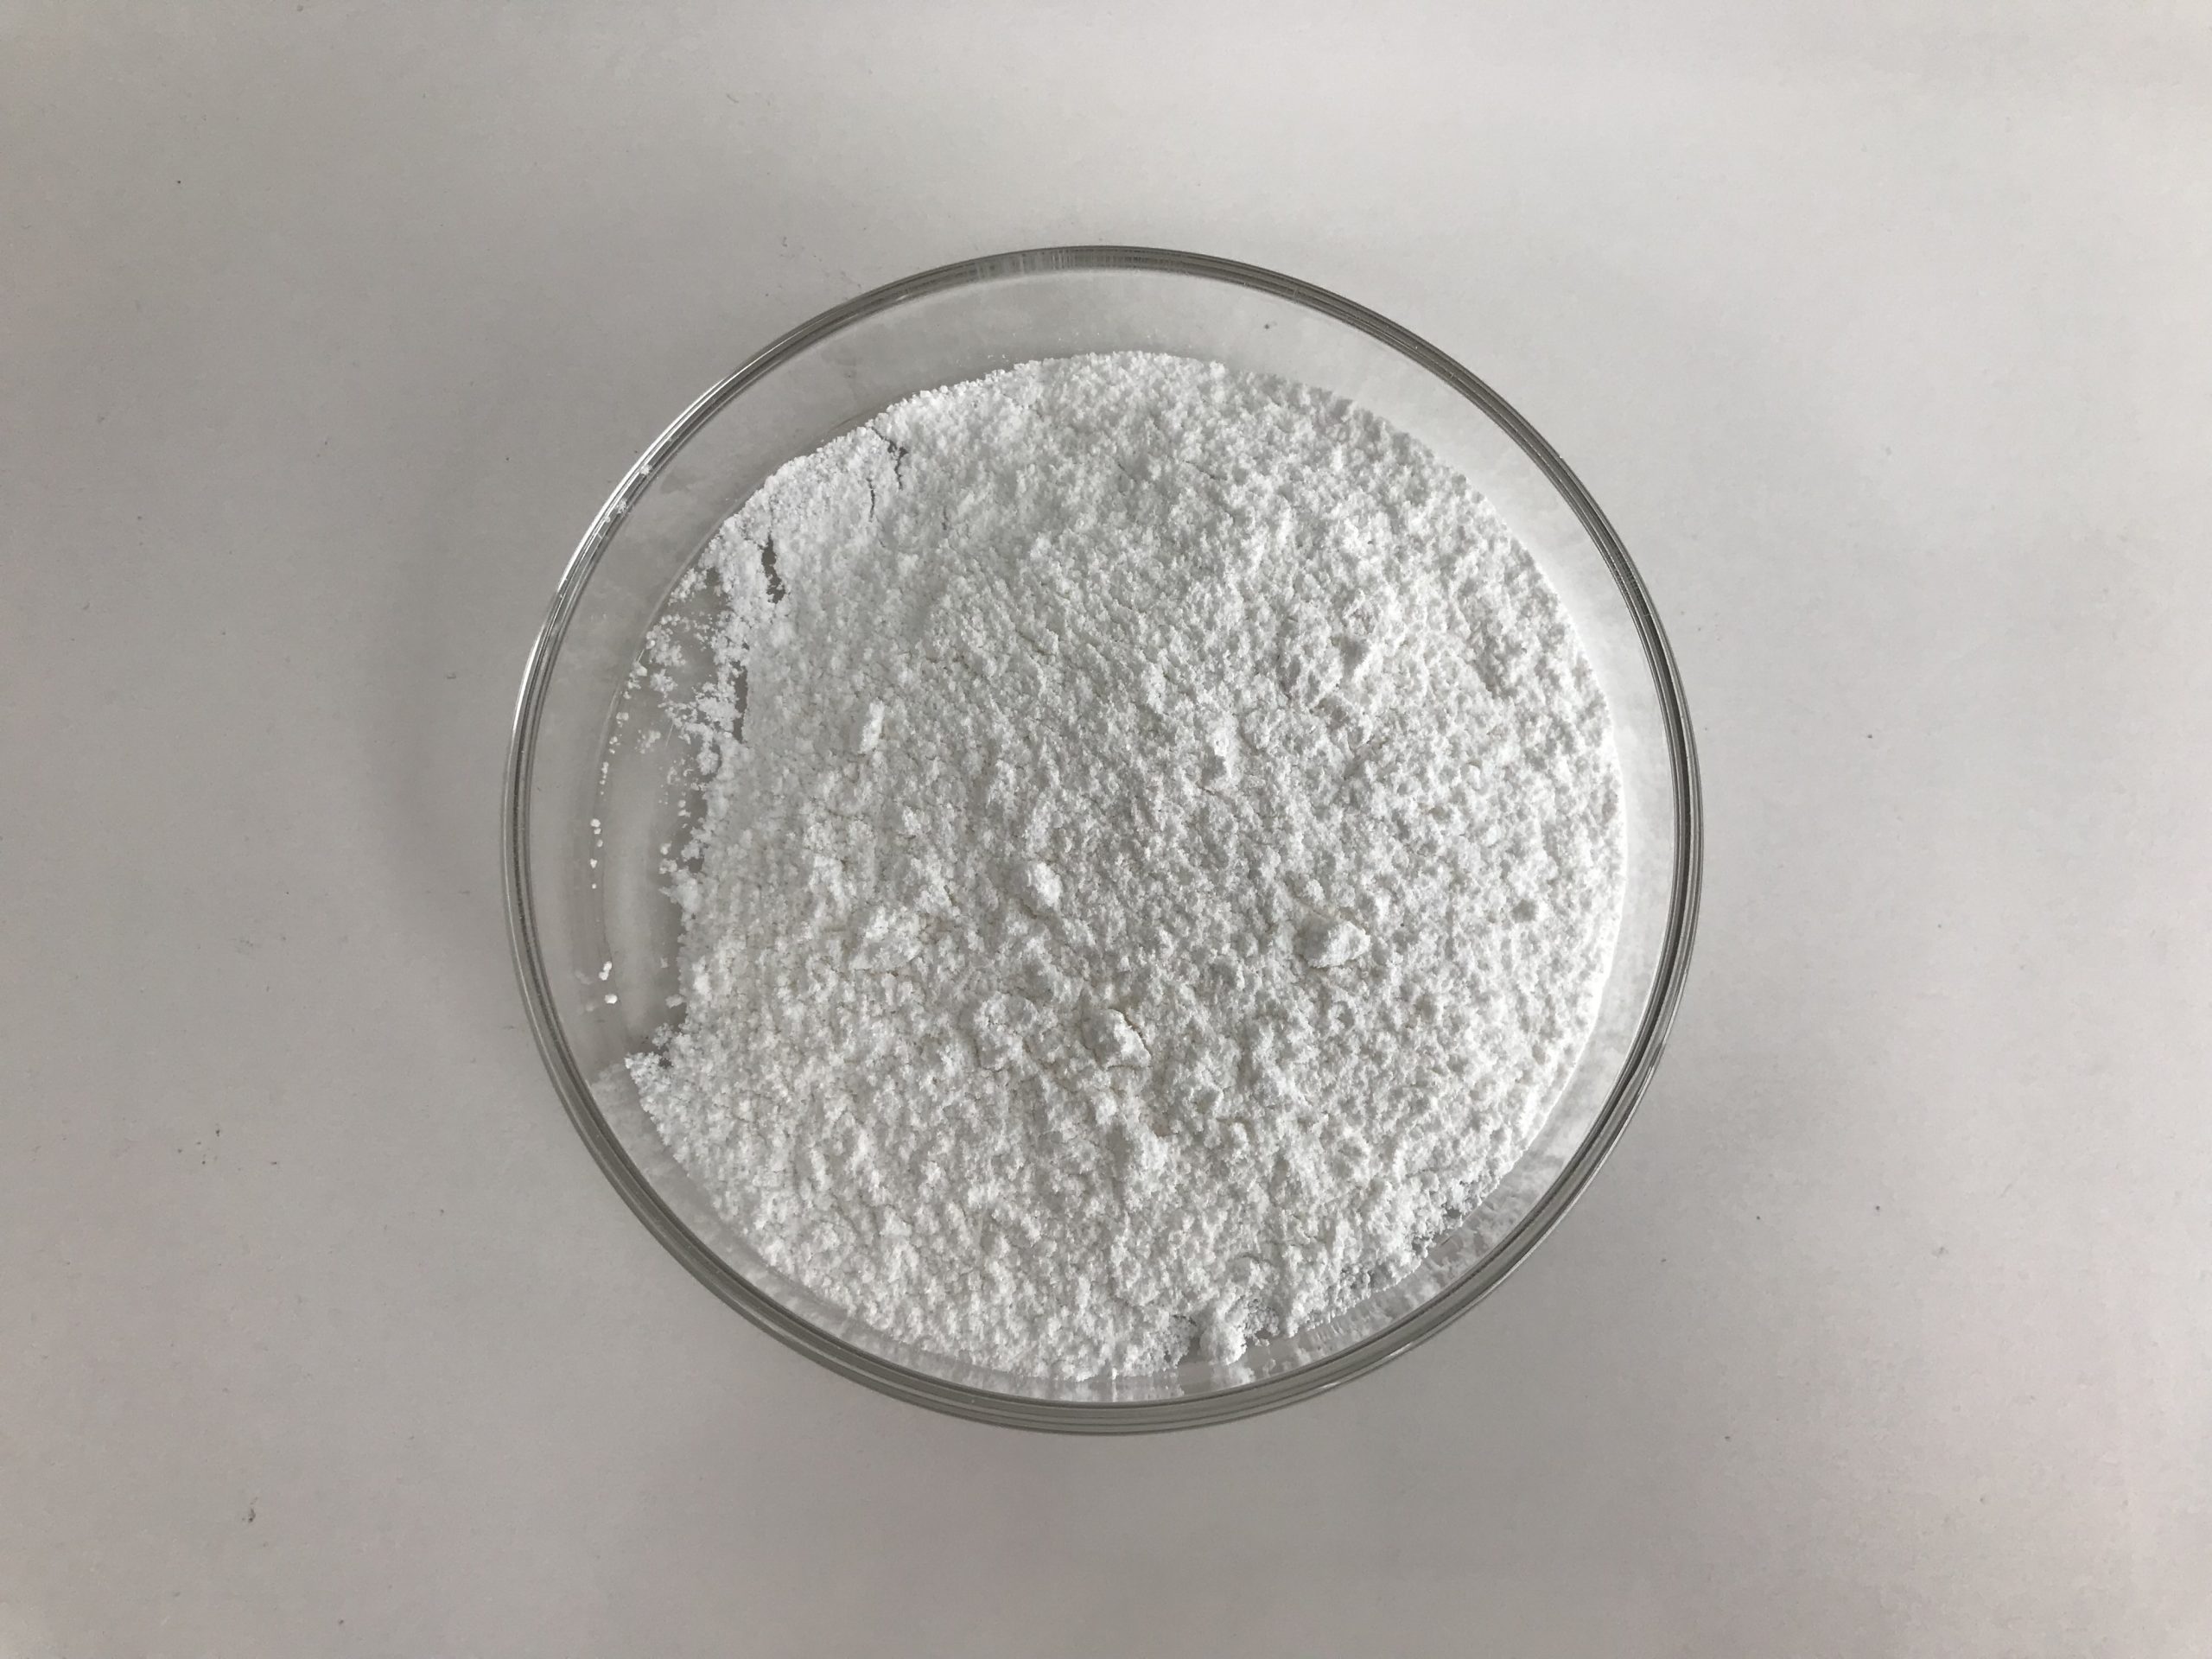 Chemical structure and physical properties of Adenosine Triphosphate-Xi'an Lyphar Biotech Co., Ltd